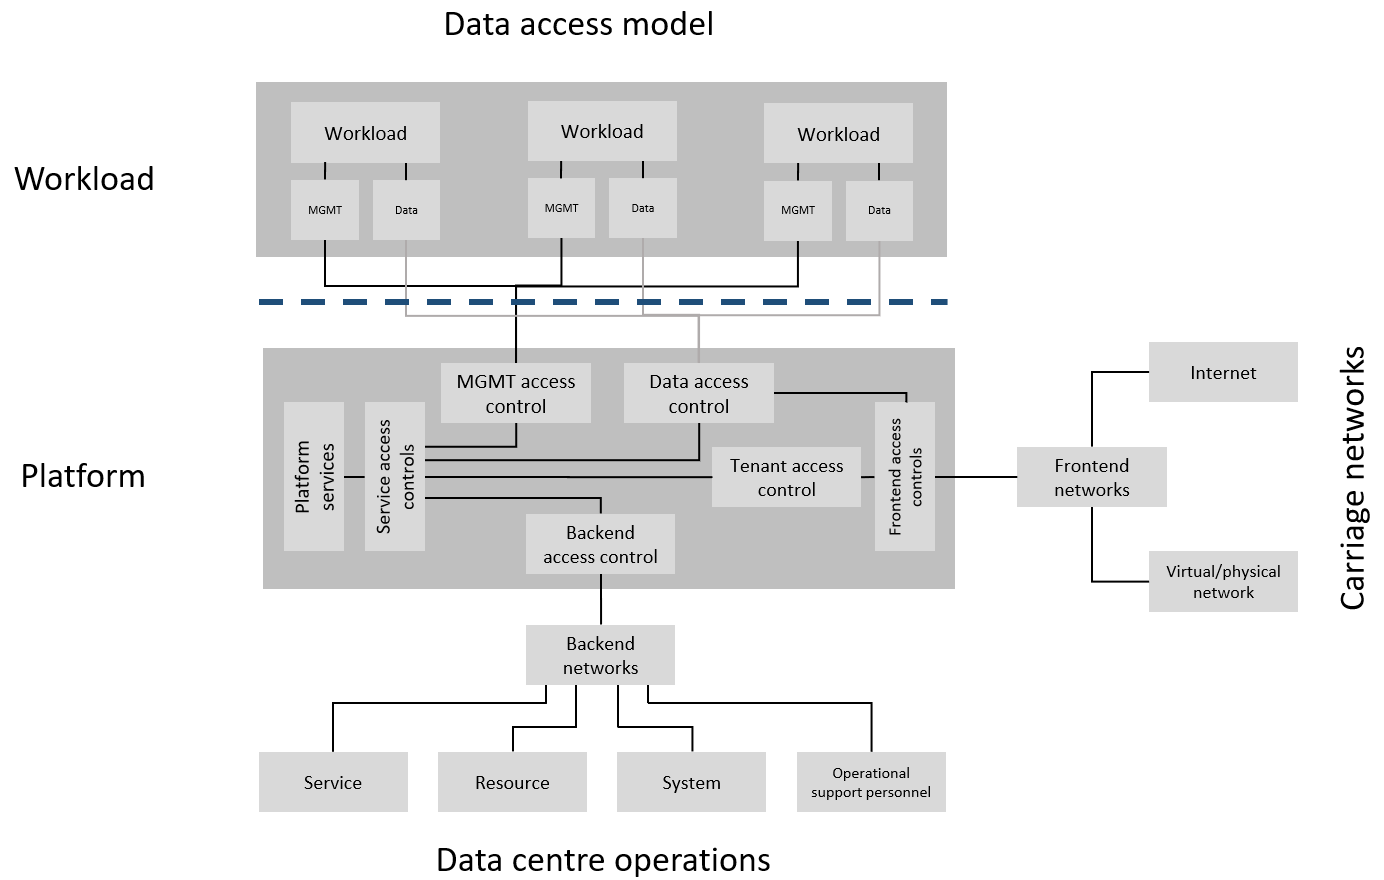 "Figure 7-2: Reference Model Access Controls"